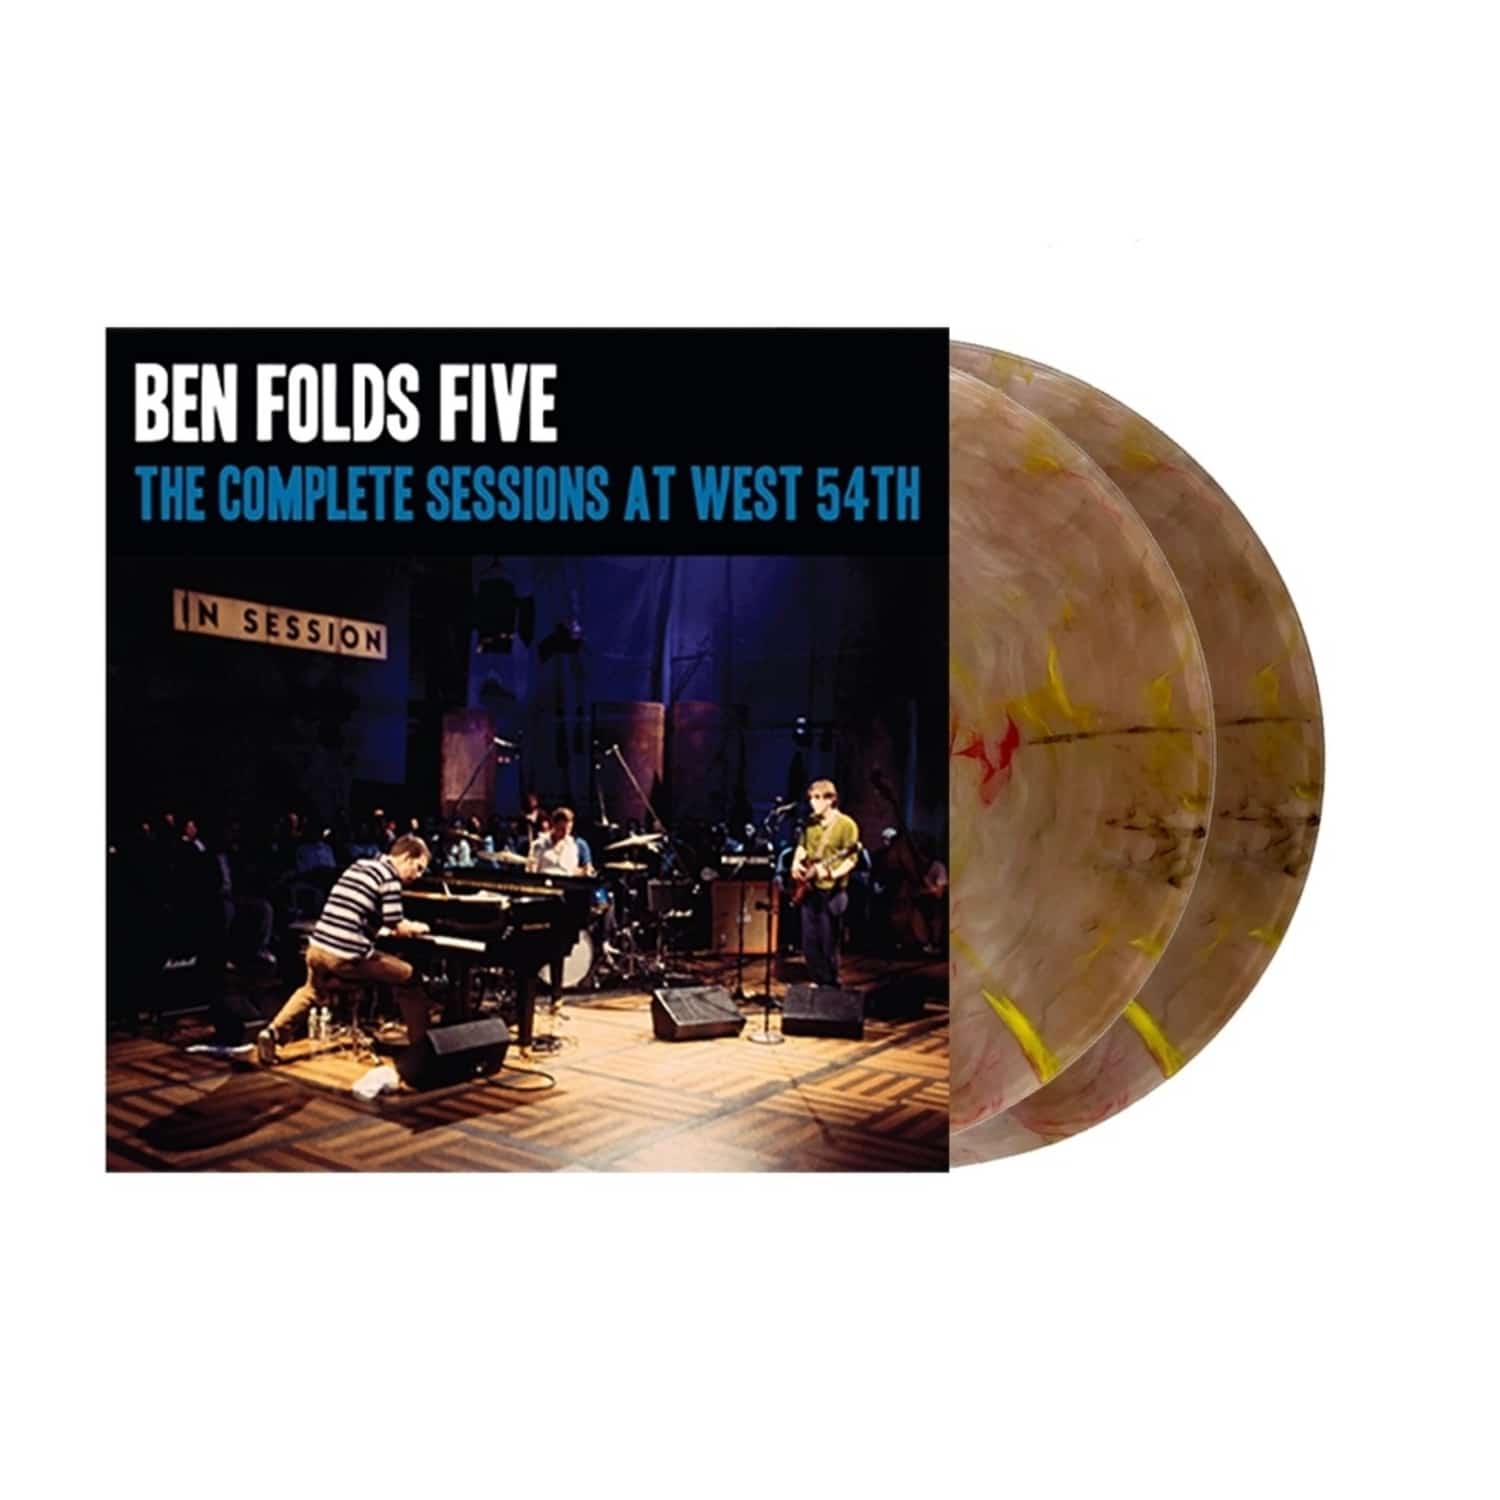 Ben Folds Five - COMPLETE SESSIONS AT WEST 54TH 